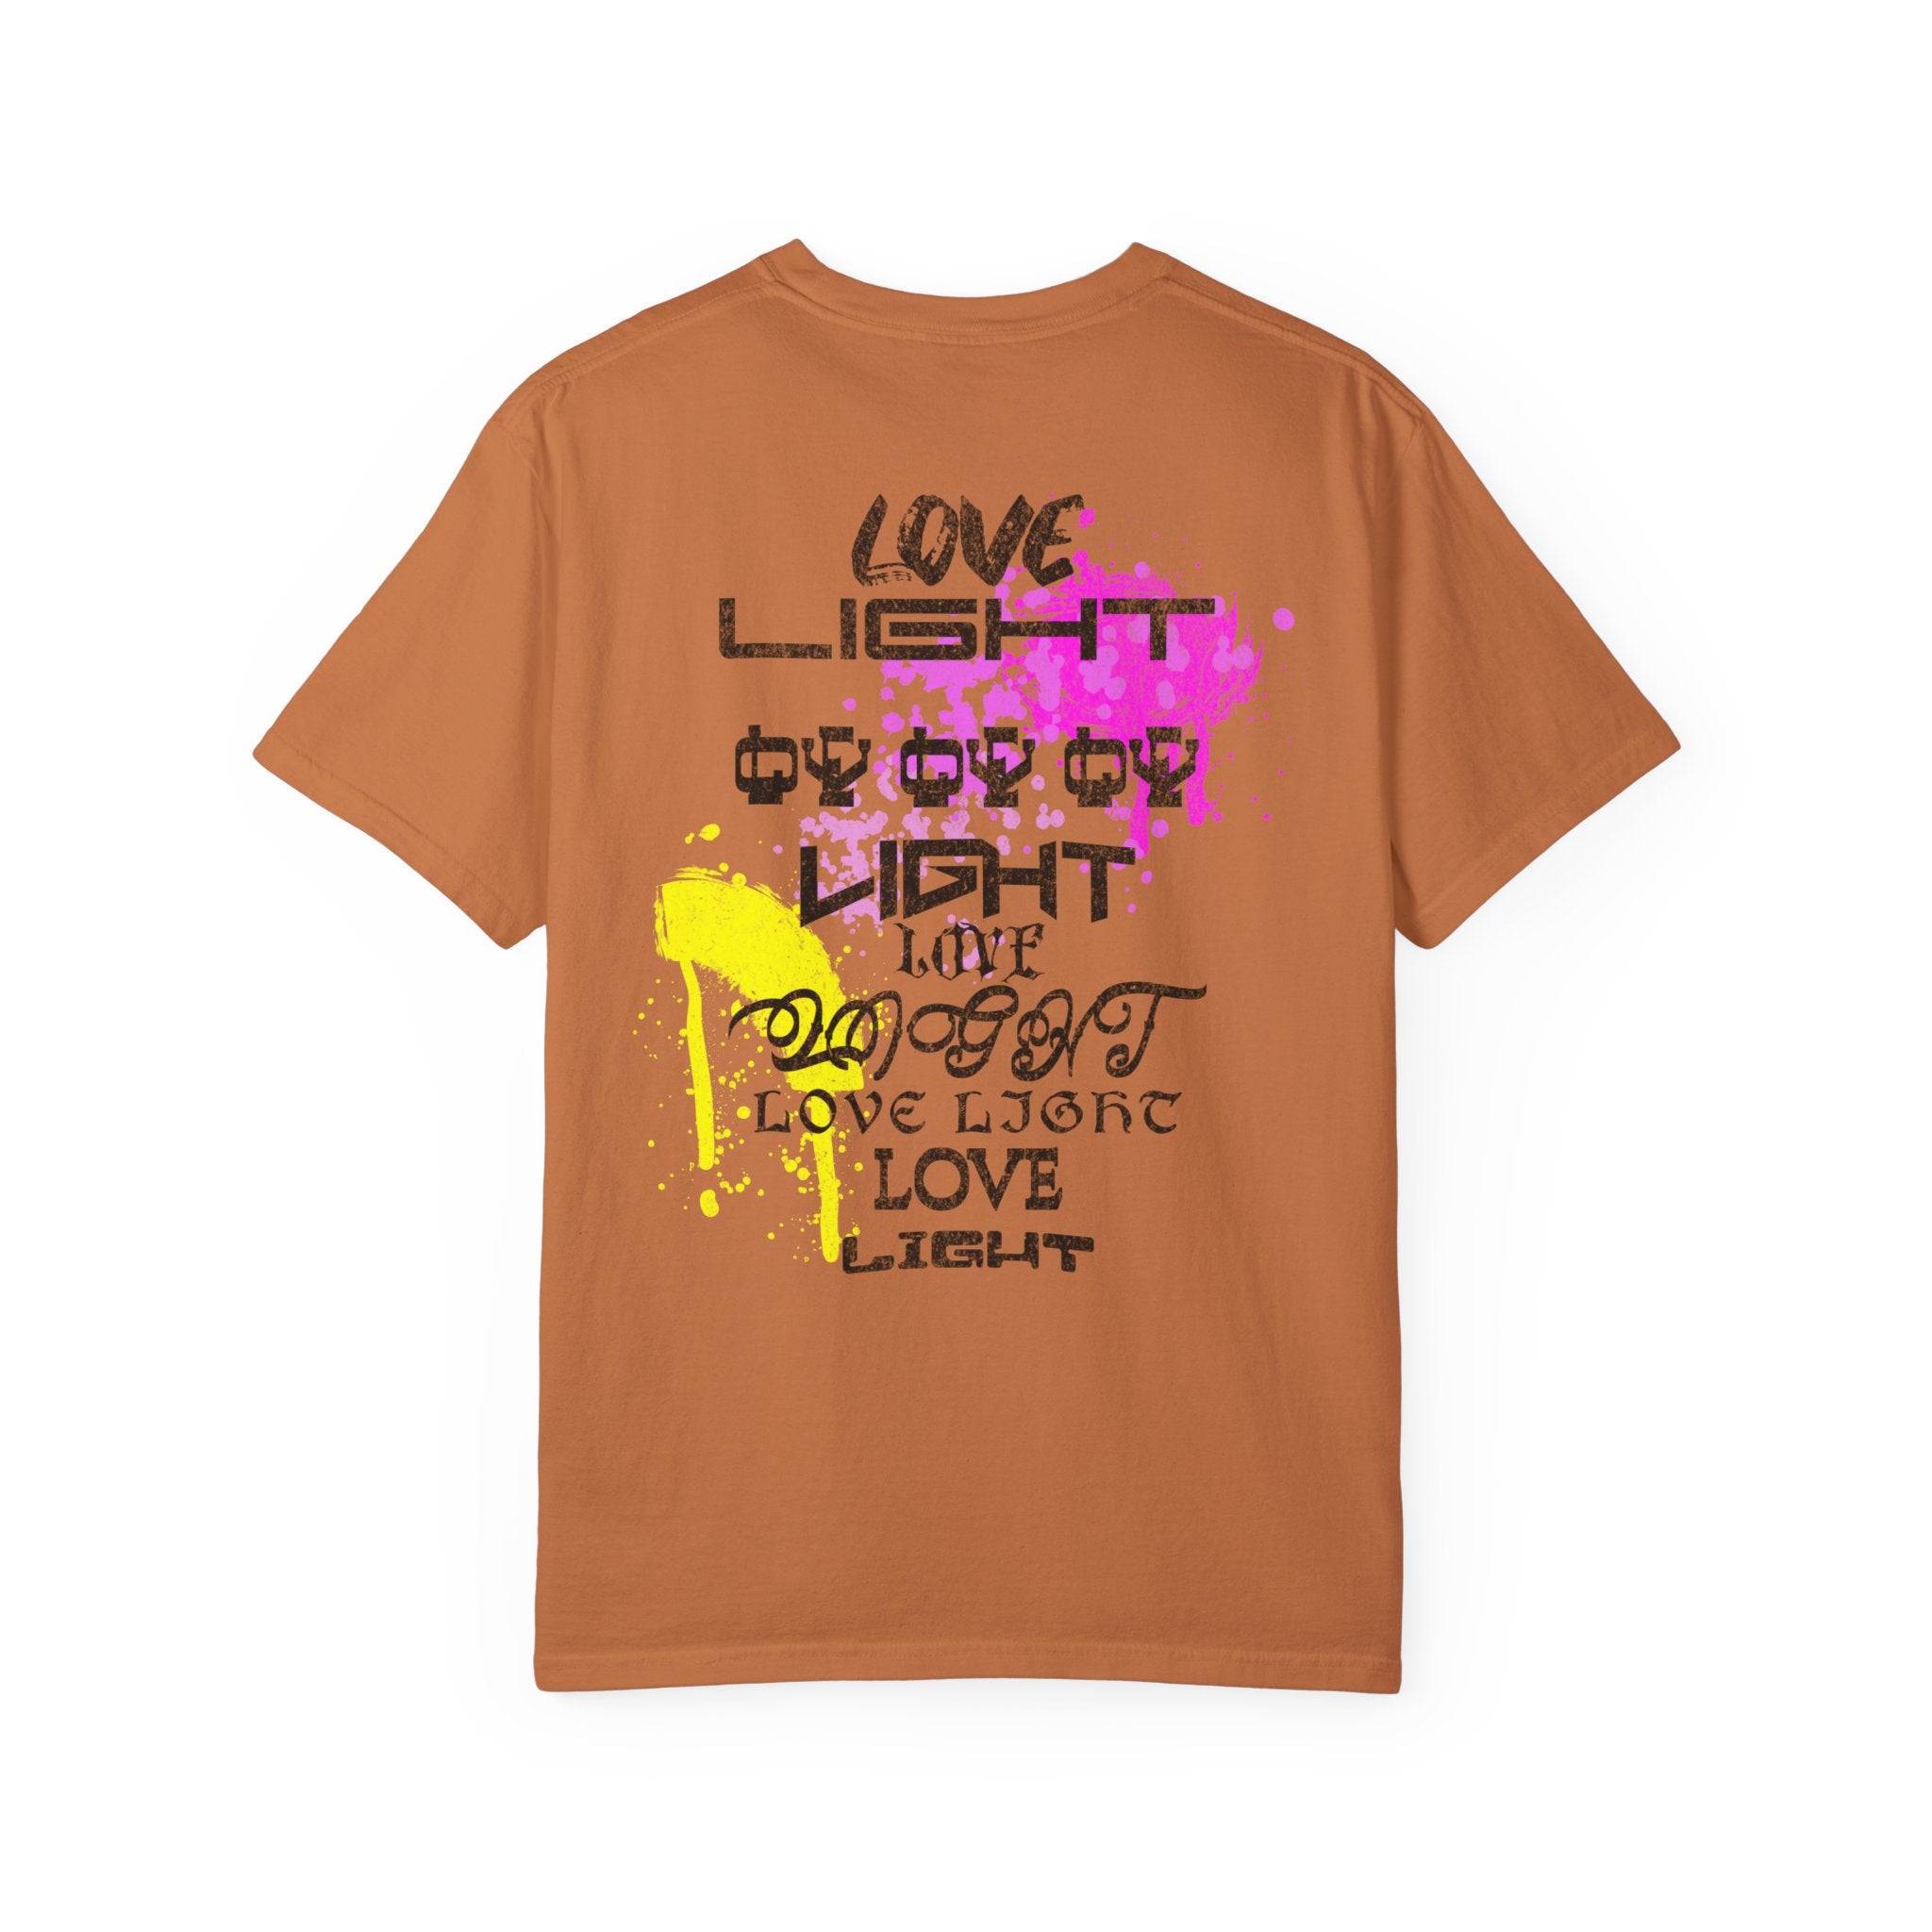 GOLDxTEAL stylish and colorful Love and Light graphic t-shirt.